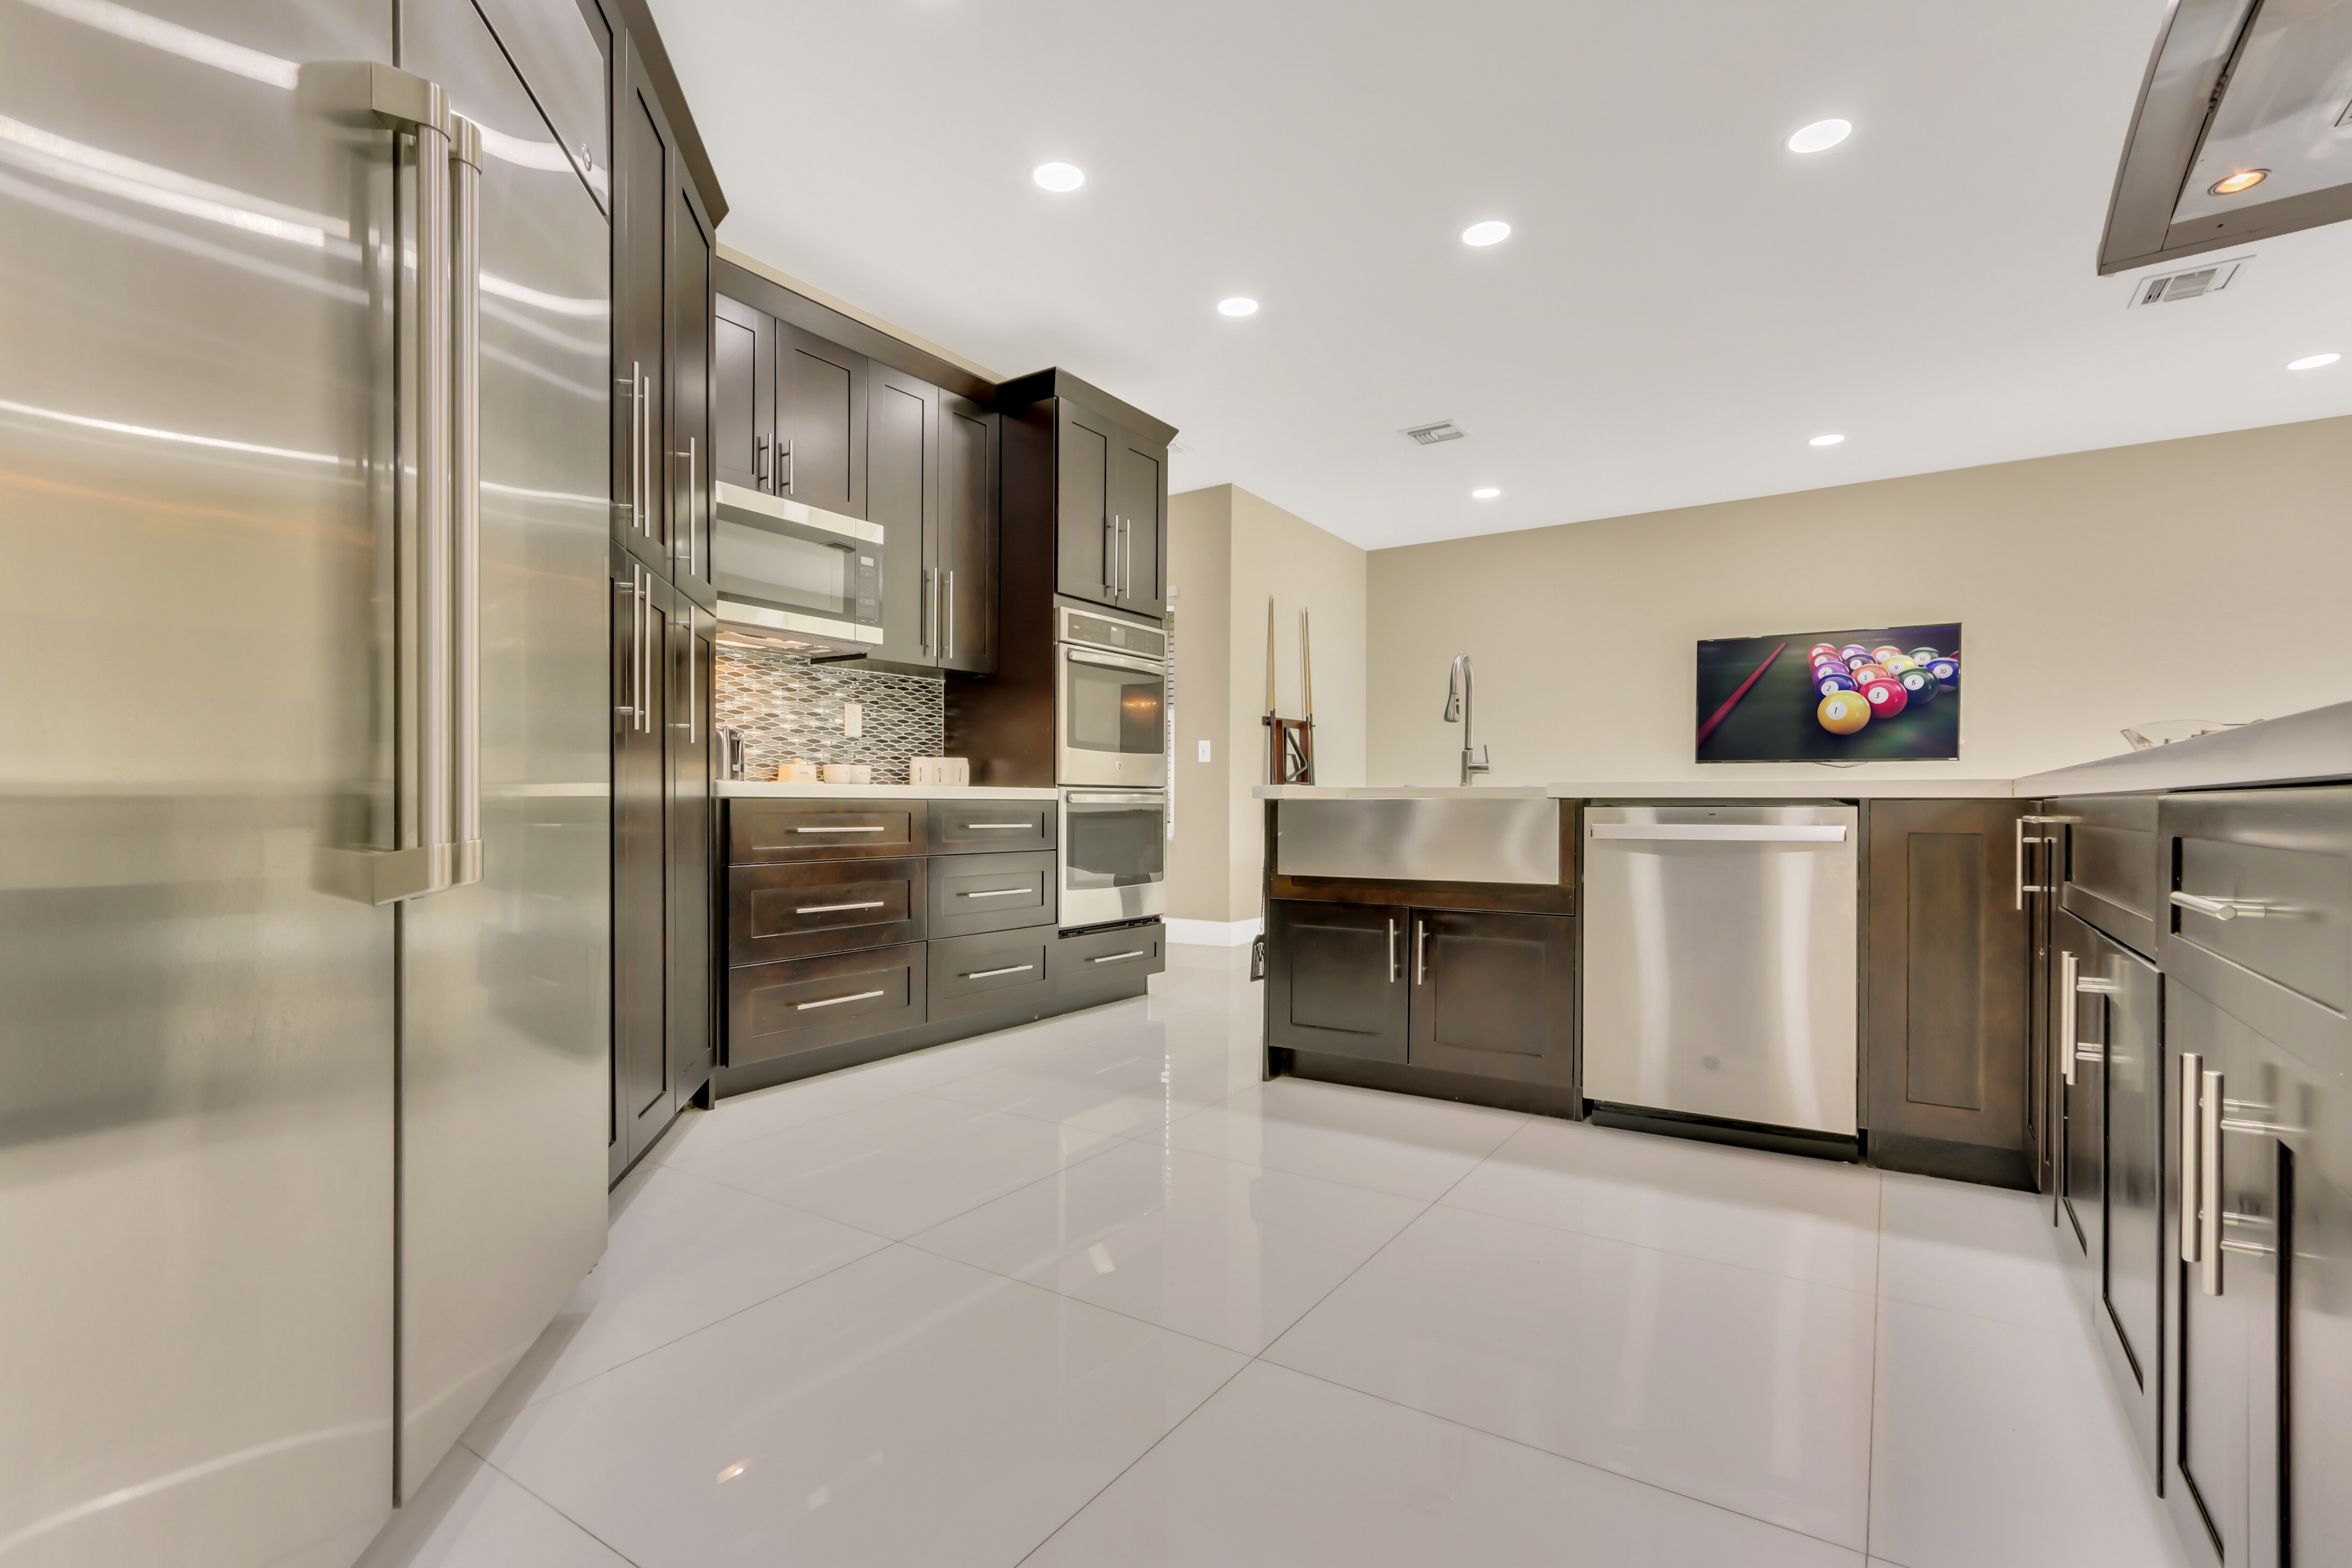 Modern kitchen equipped w/ top-of-the-line appliances